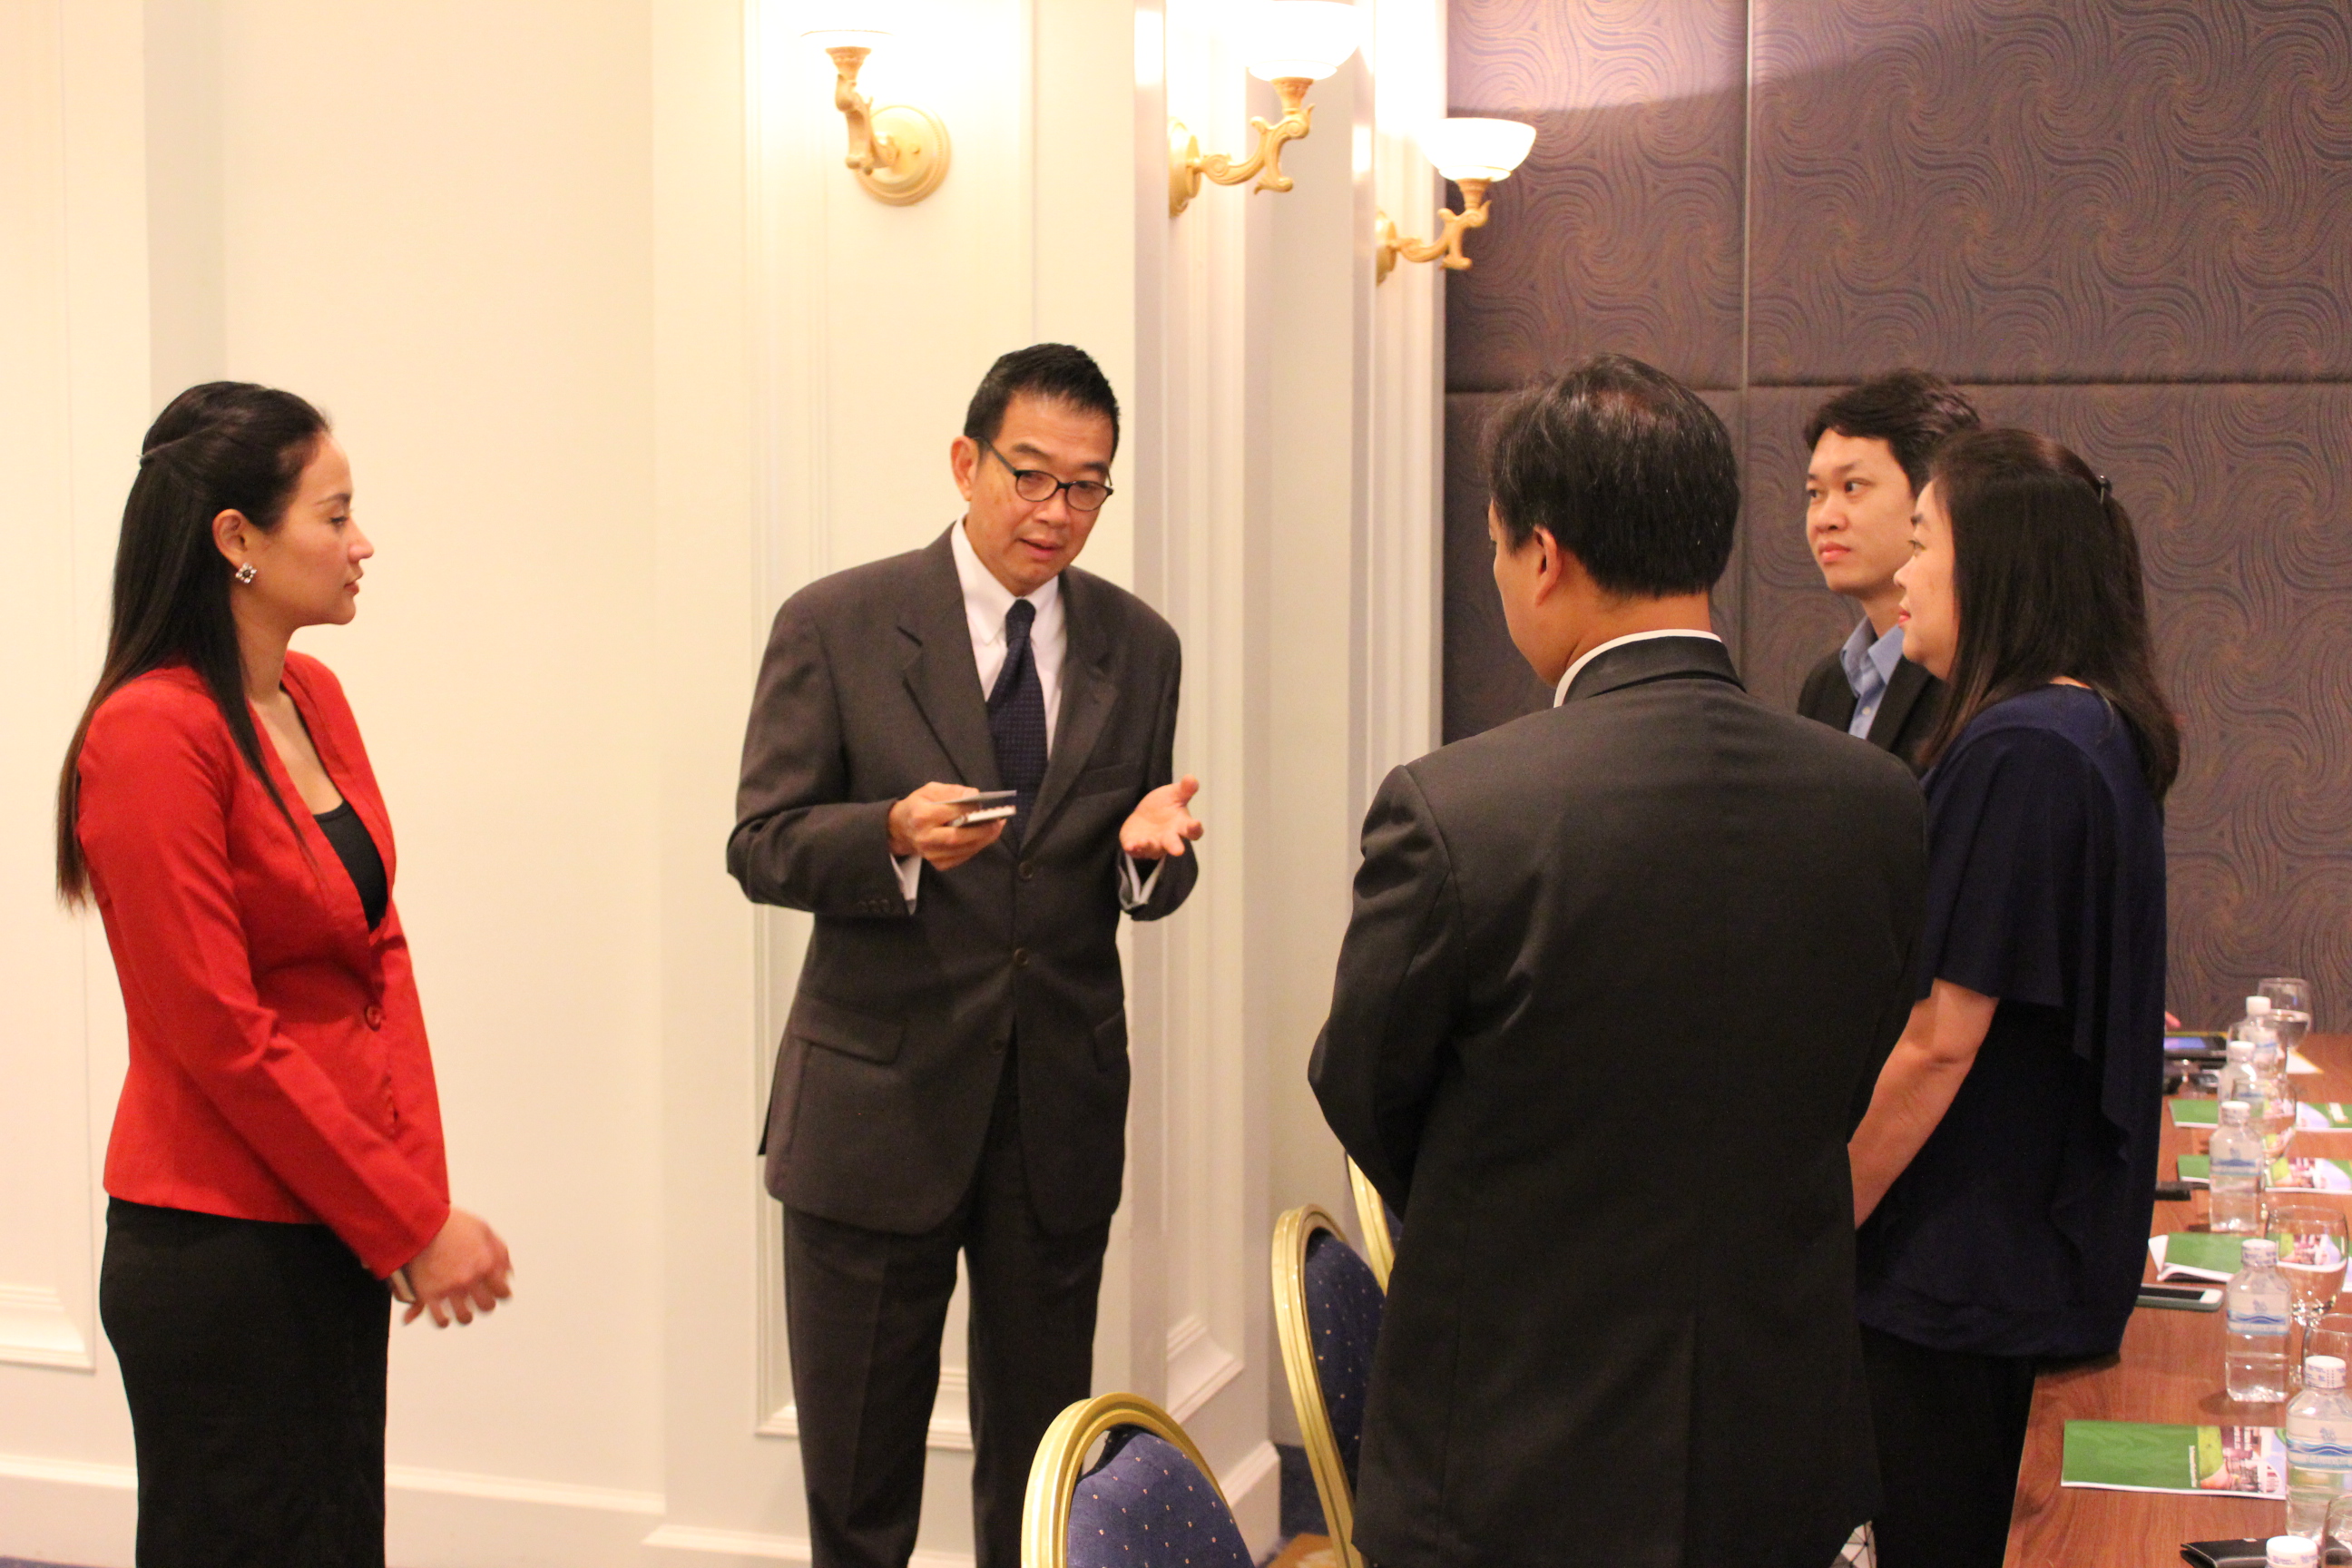 Business Seminar organized  by Royal Thai Embassy in Canberra, Australia and Wonnapob Company Limited